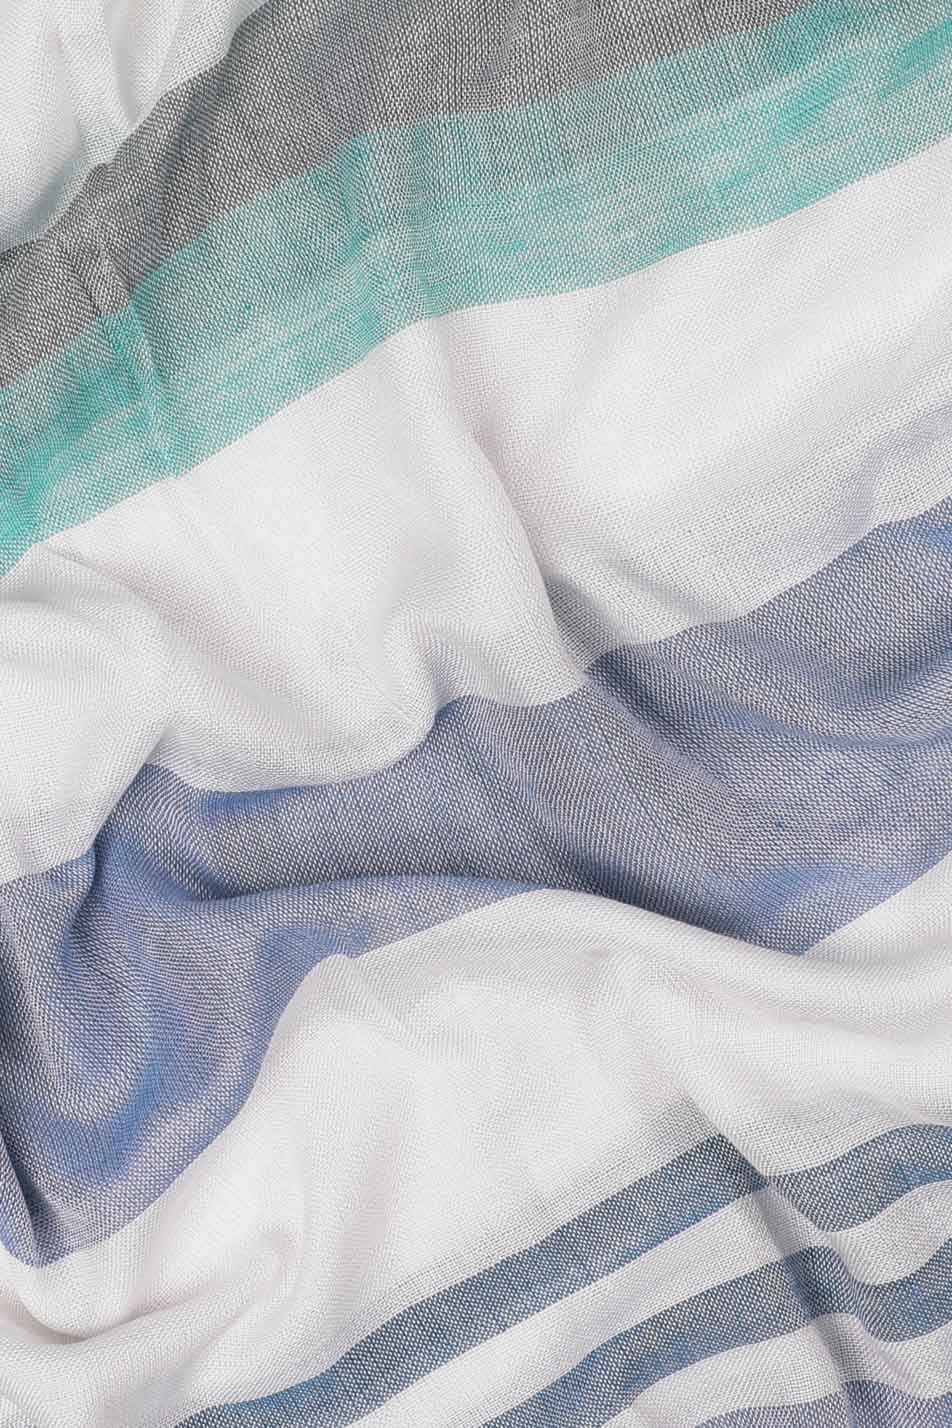 Stripe cotton scarf with colours blue, teal and white